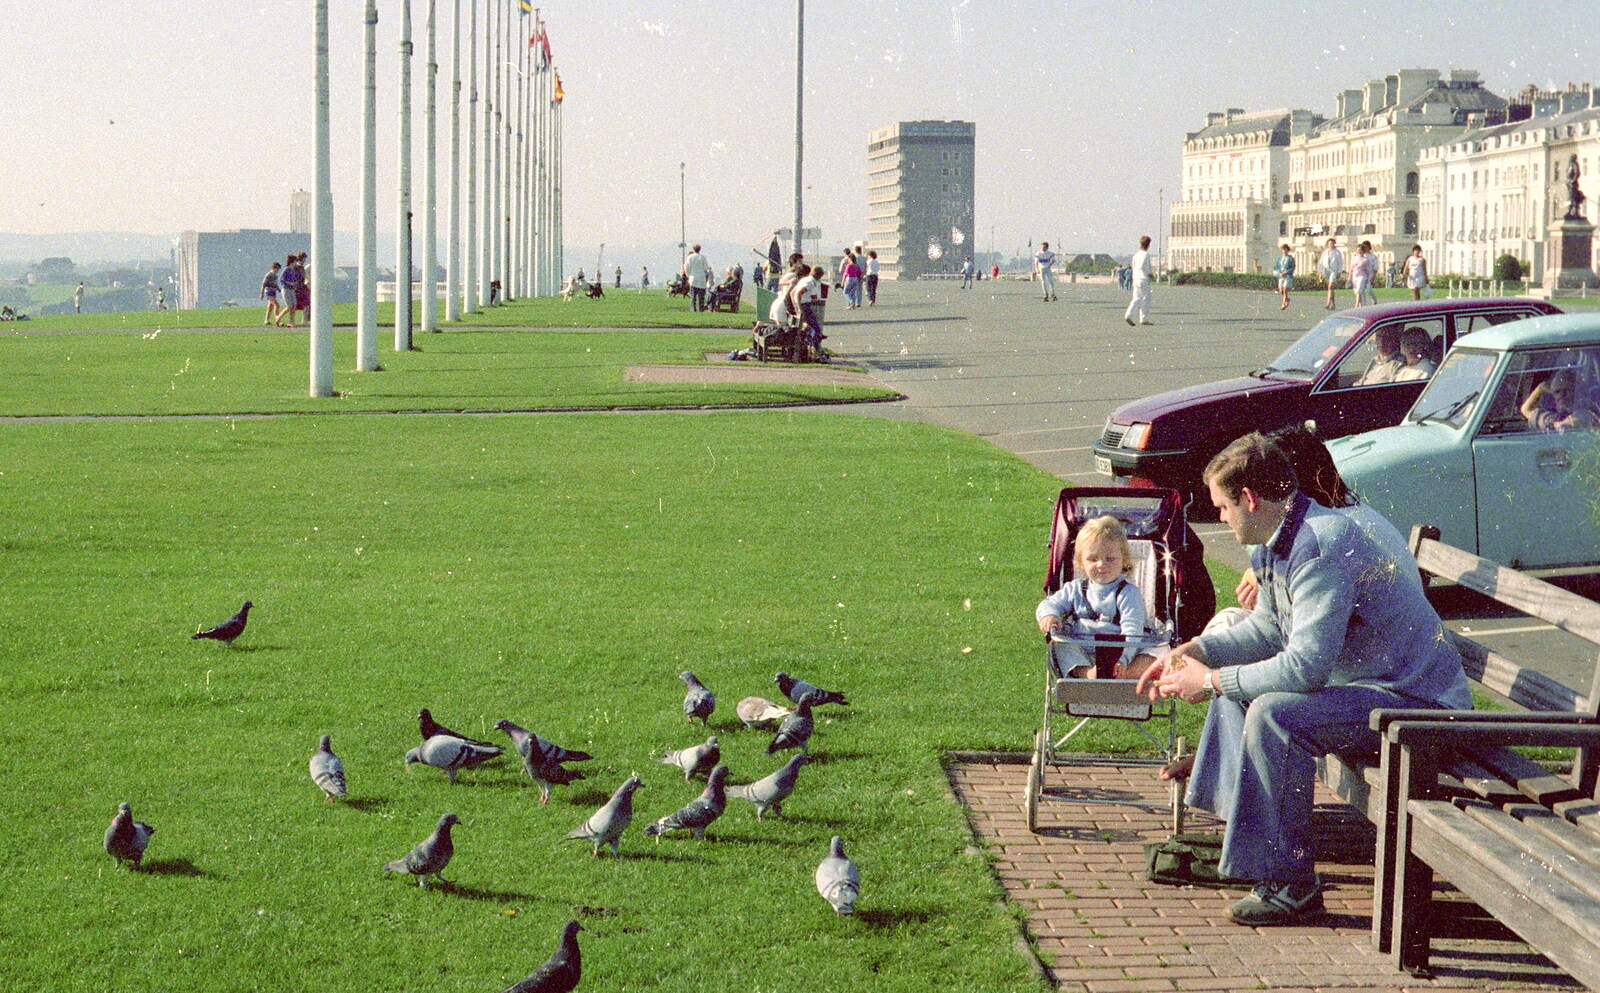 Some pigeon action down on Plymouth Hoe from Uni: First Weeks At Polytechnic, Umbrellas and a Visit From Liz, Plymouth - 26th September 1985